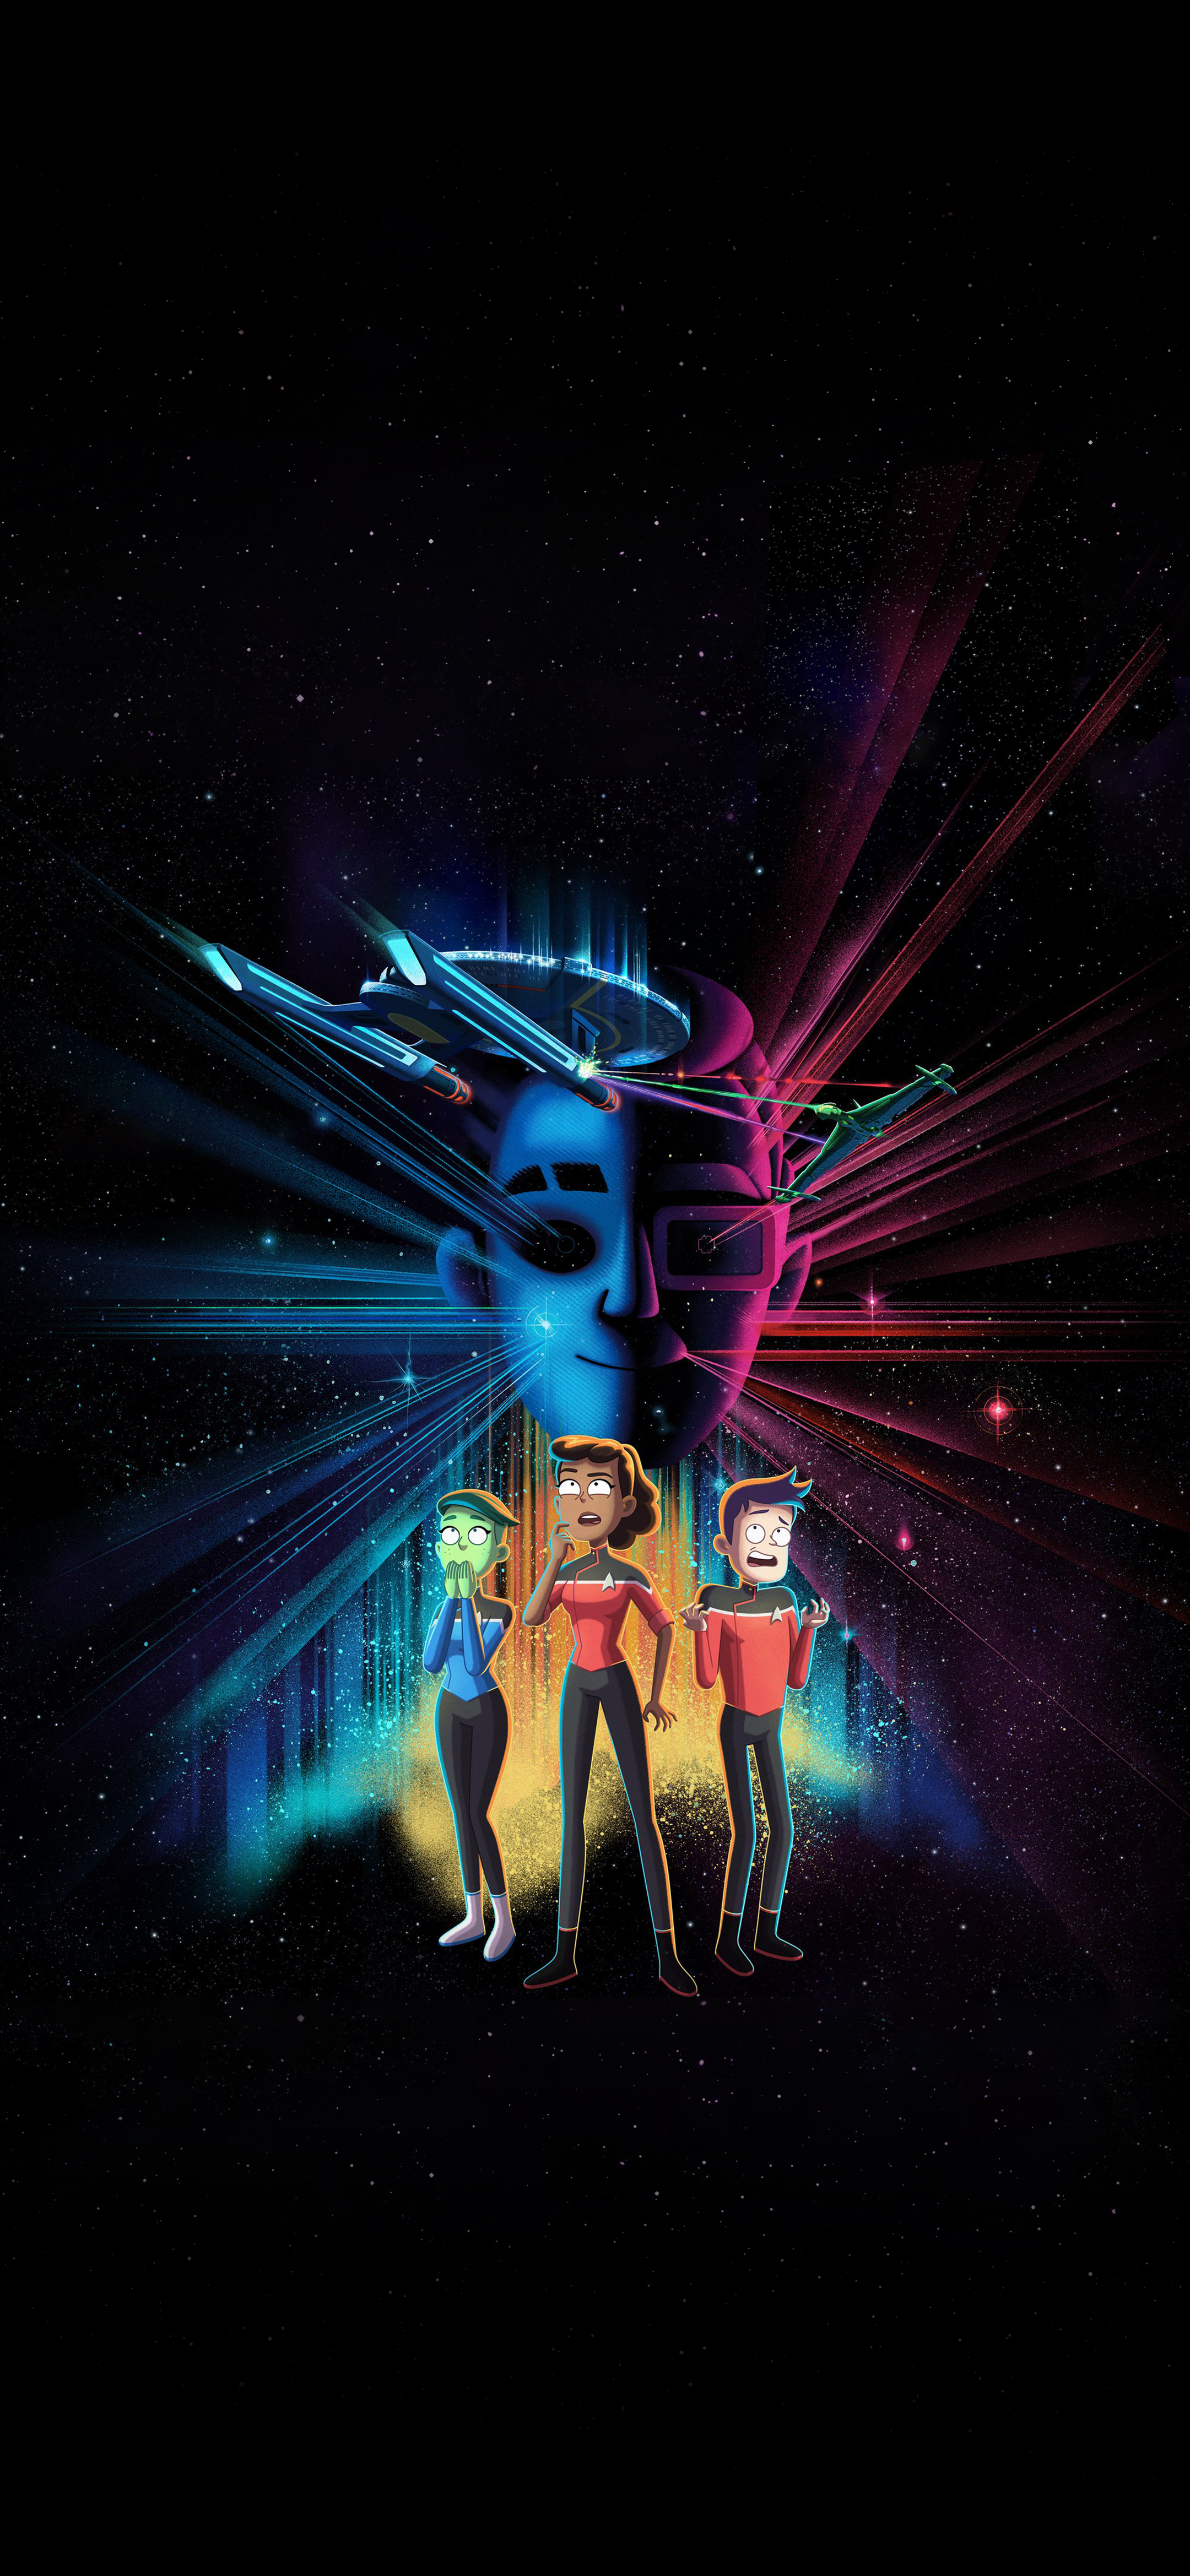 Removed the text from the new Star Trek: Lower Decks Poster to make a mobile wallpaper